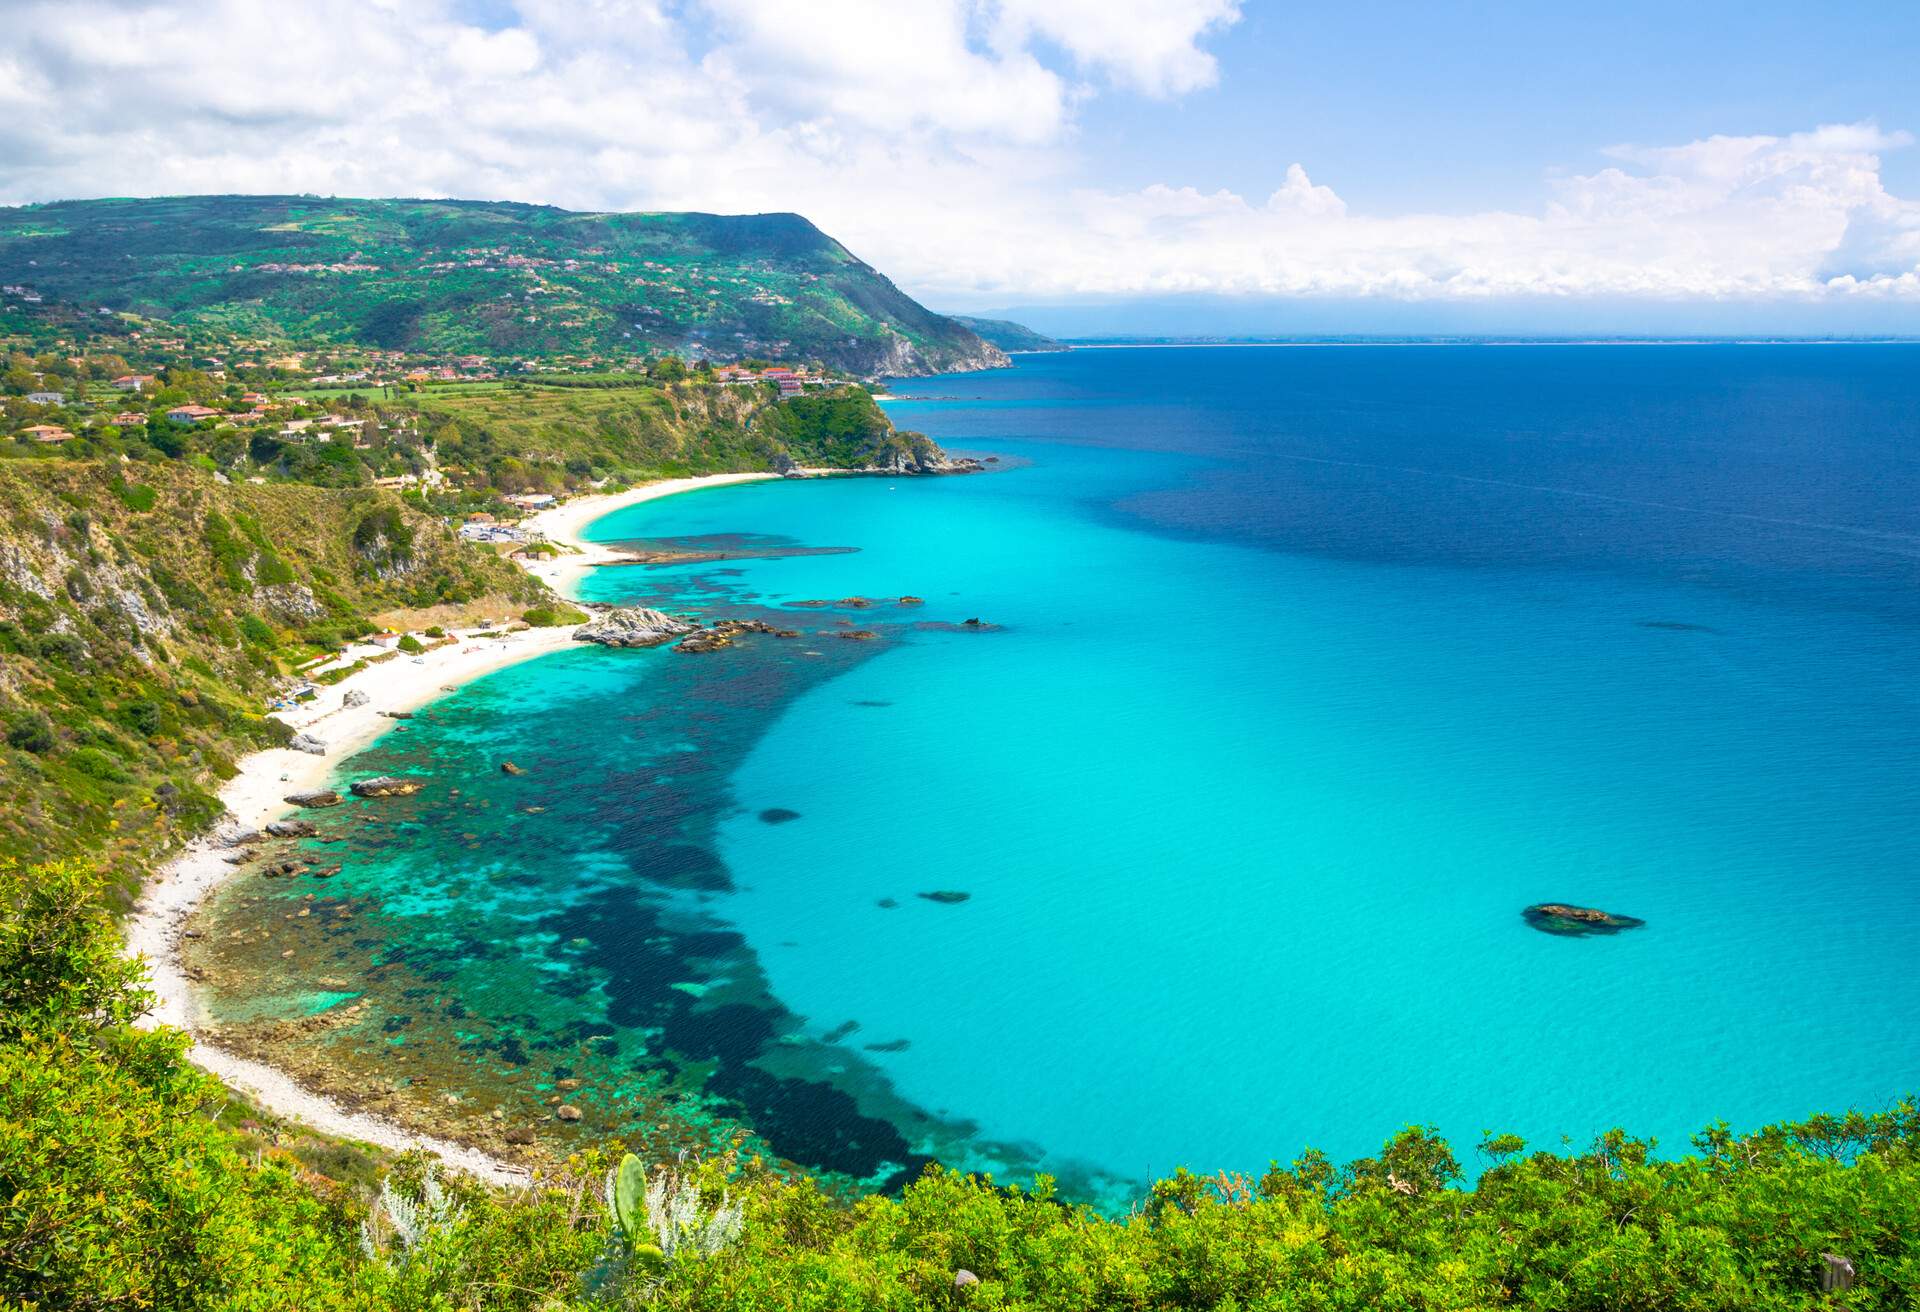 Aerial amazing tropical view of turquoise gulf bay, sandy beach, green mountains and plants, blue sky white clouds background from cliffs platform Cape Capo Vaticano Ricadi, Calabria, Southern Italy; Shutterstock ID 1161360646